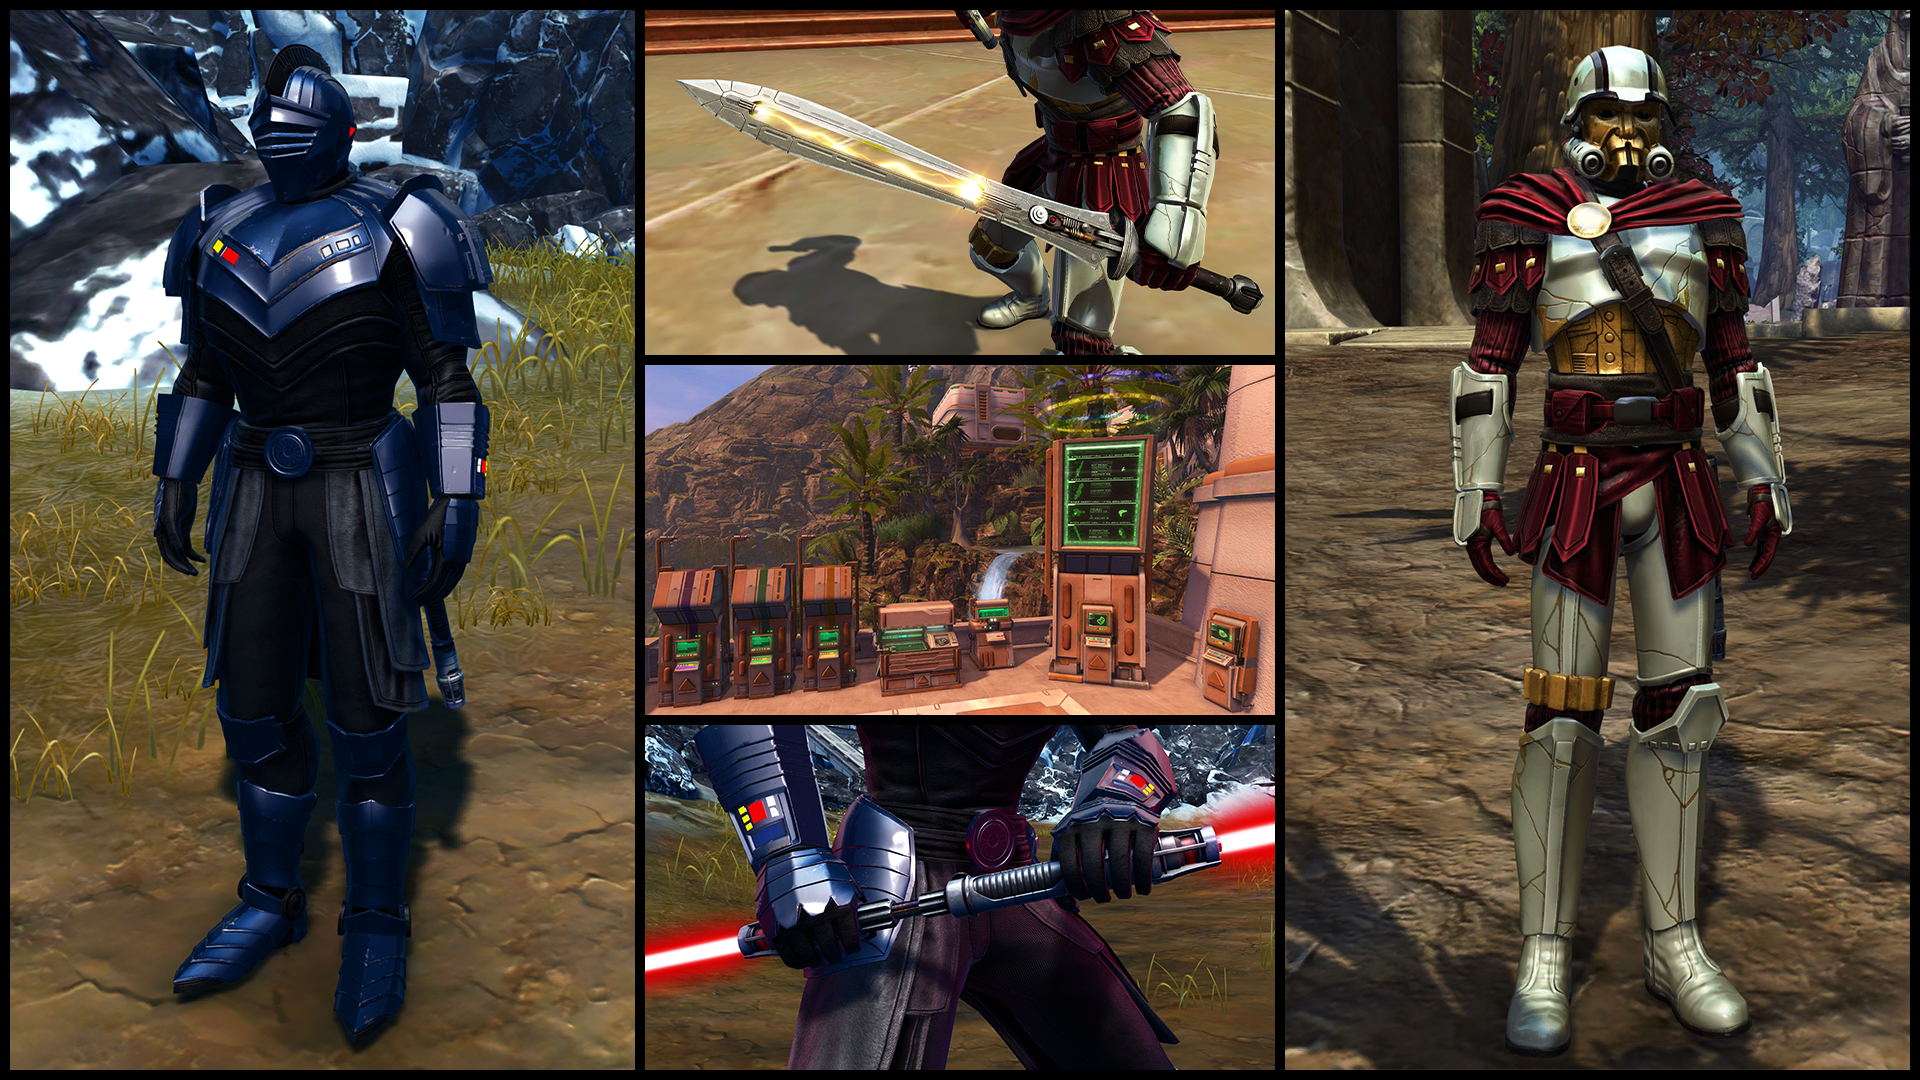 SWTOR Releases Game Update 7.4.1 “Building a Foundation”